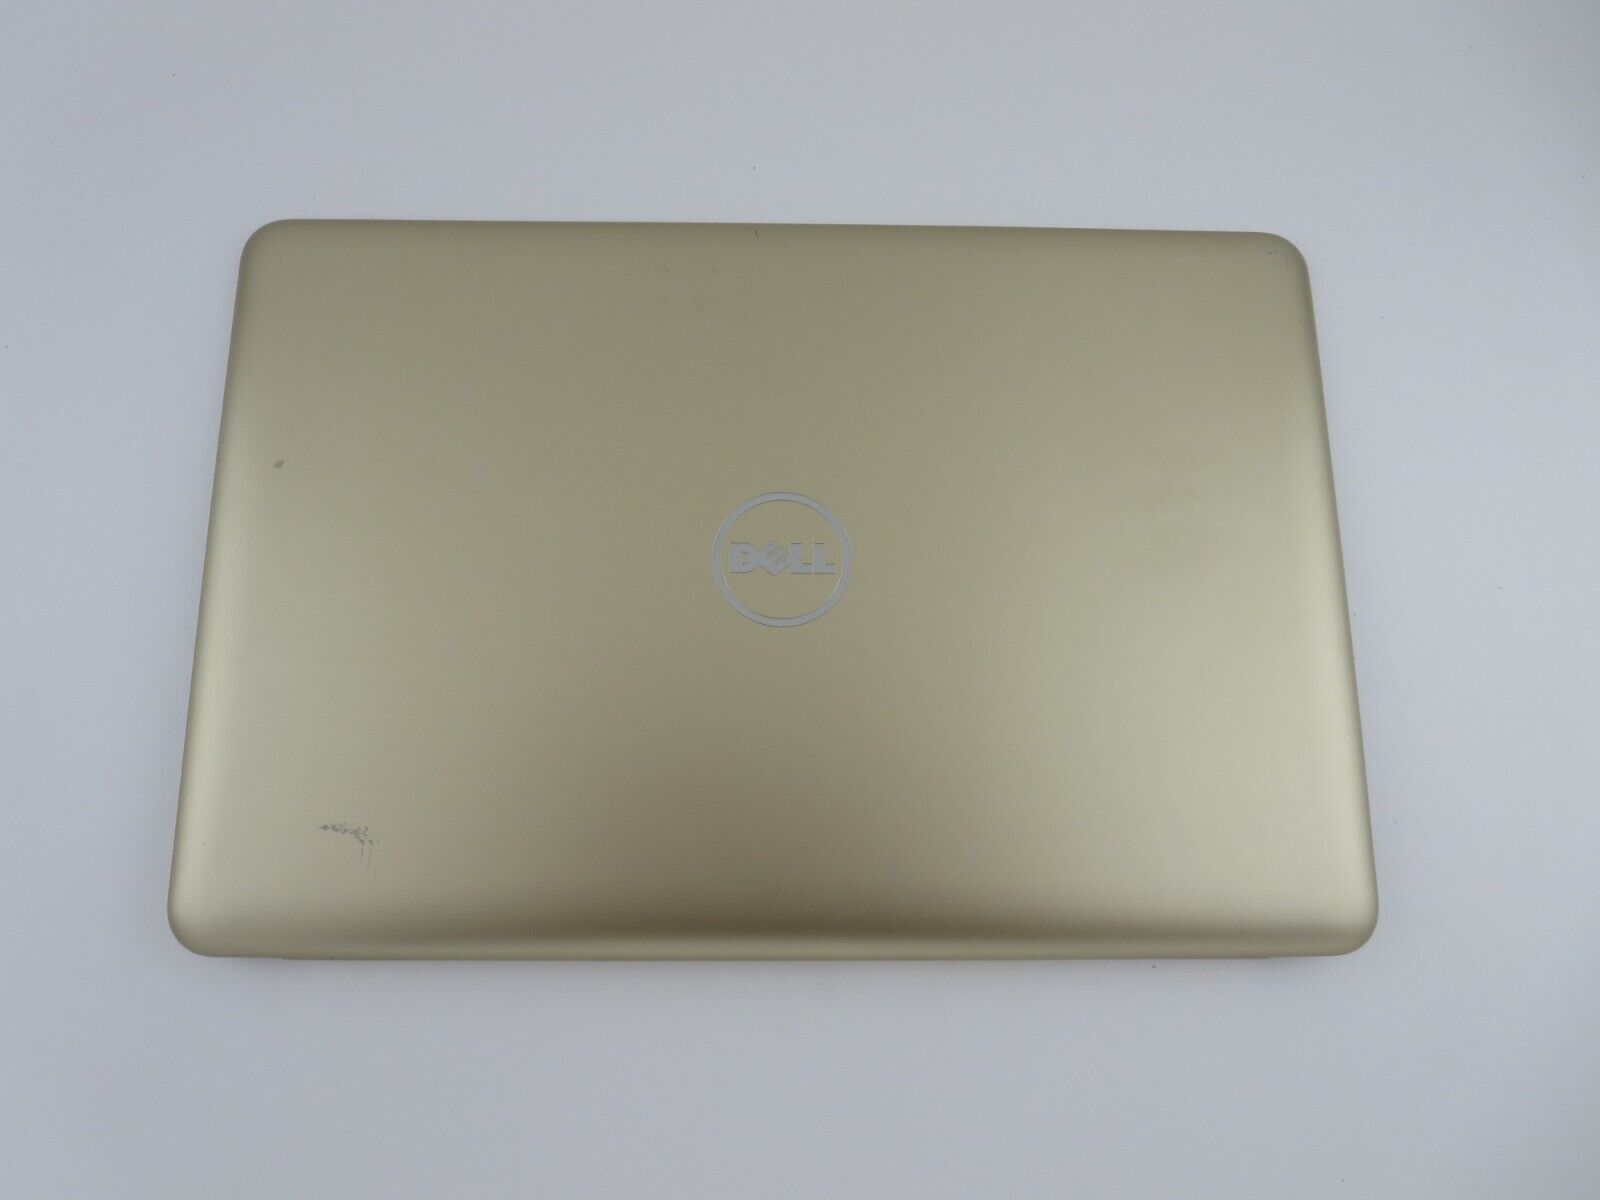 Primary image for OEM Dell Inspiron 17 5767 / 5765 Gold LCD Back Cover Lid - K5YCJ 0K5YCJ 526